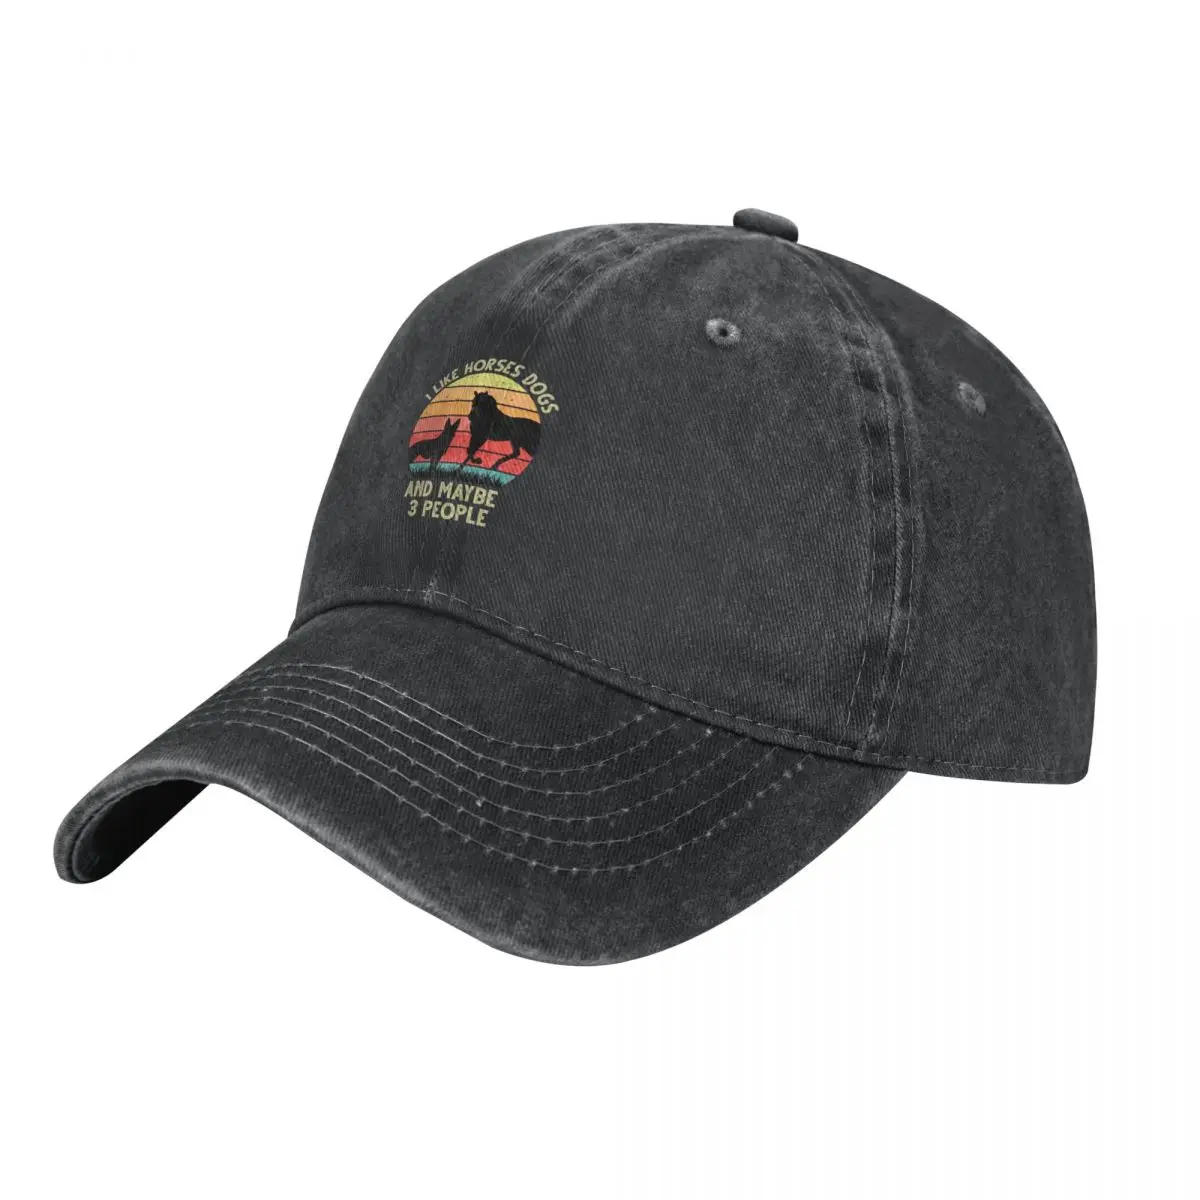 

I Like Horses Dogs And Maybe 3 People. Cowboy Hat Beach Bag Visor New Hat hiking hat Ladies Men's